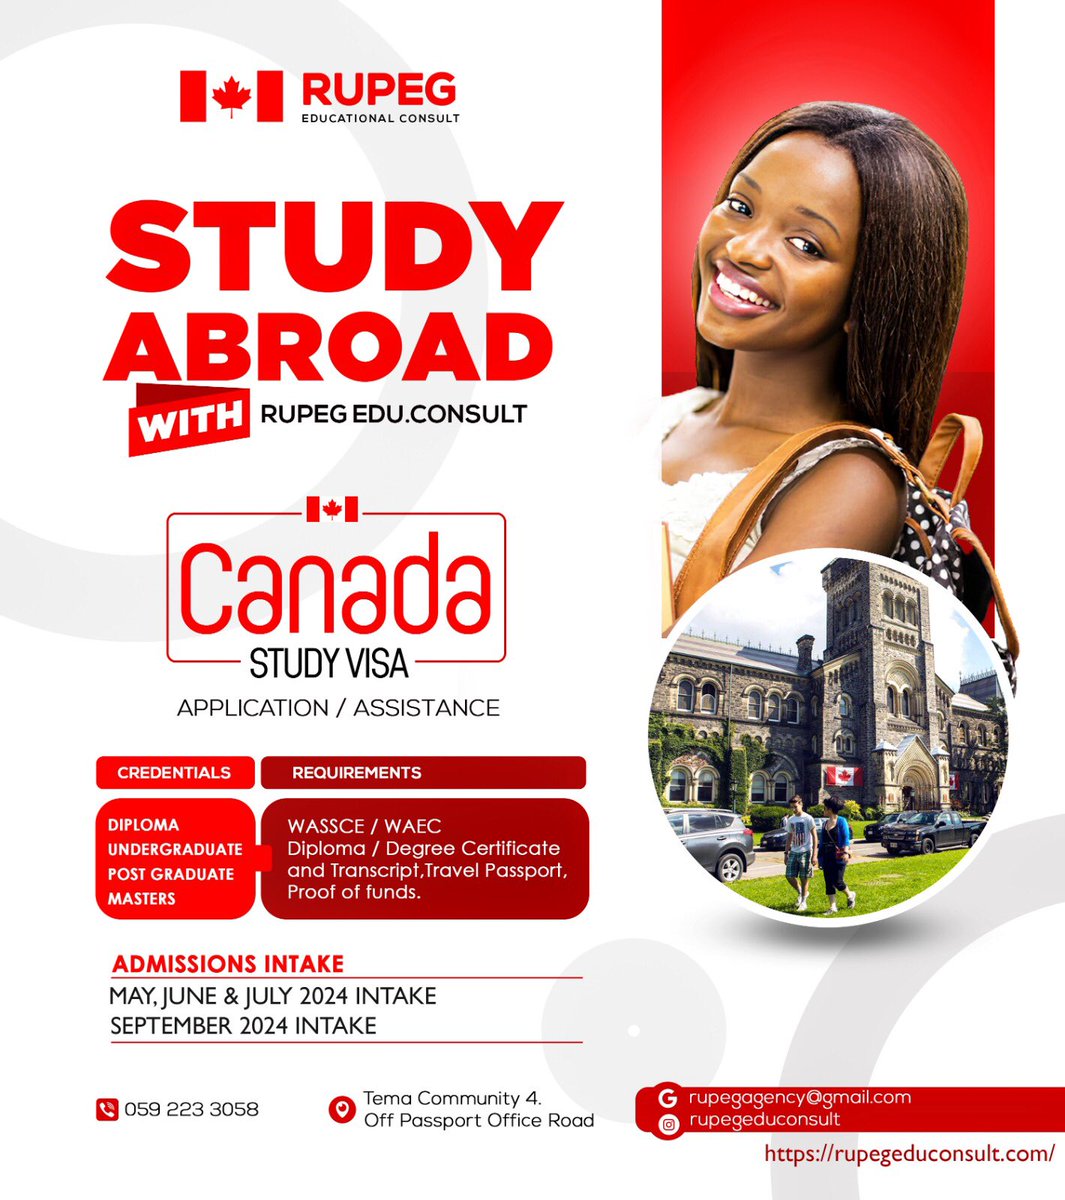 We pray for countless visa approvals in 2024 and beyond. May God be our helper. #StudyAbroadwithPerriGreno Service at your beck and call. 🇨🇦 🍁✈️❤️ #Happy2024 #NewYear #NewYear2024 #NewYearEve Happy New Year